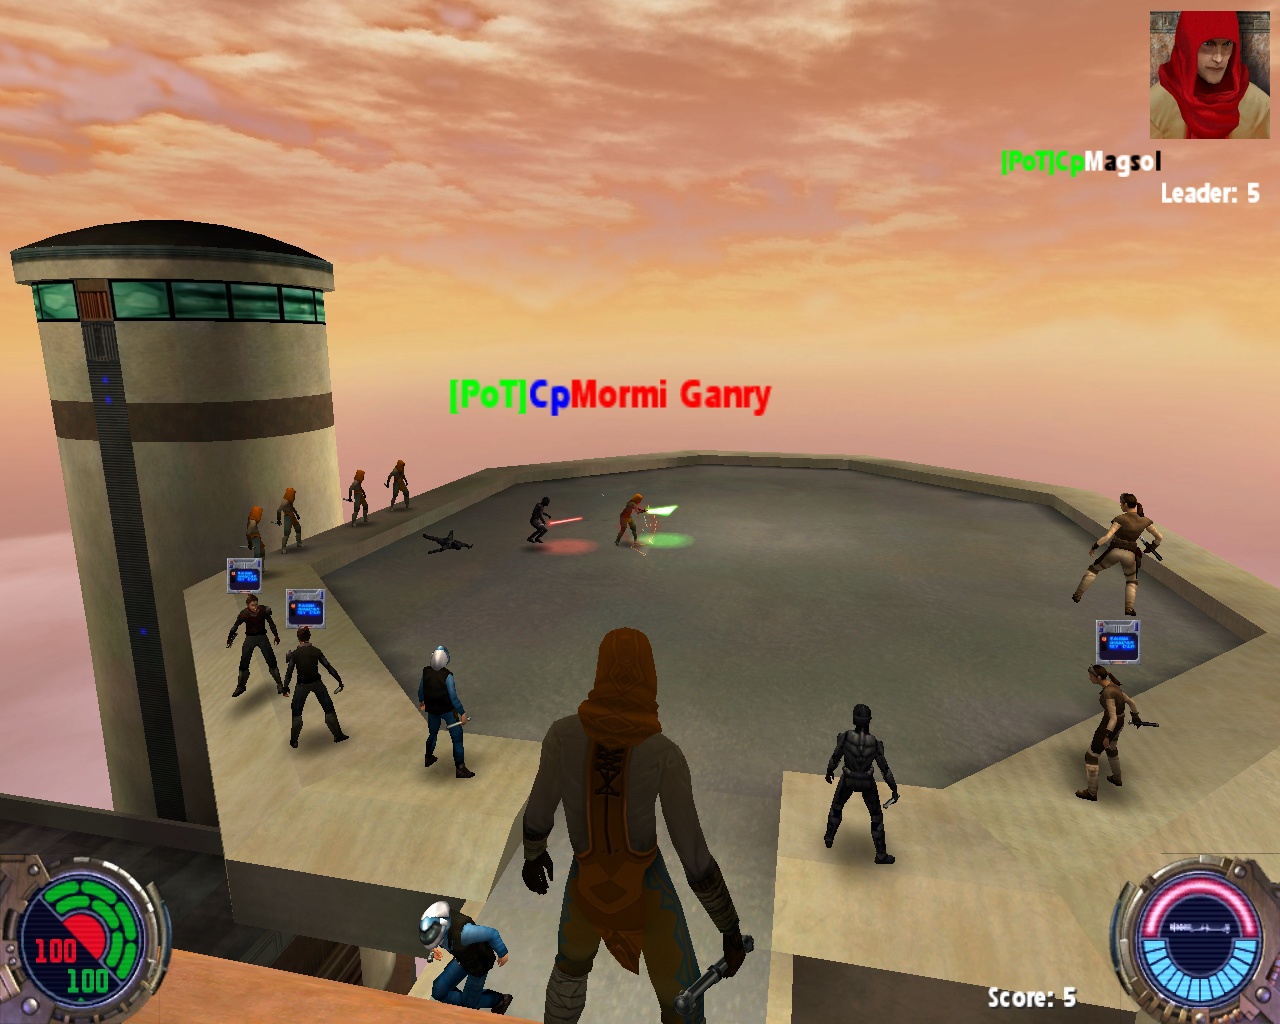 A screenshot like before, but this time showing lots of players standing around mid-game chatting with each other.